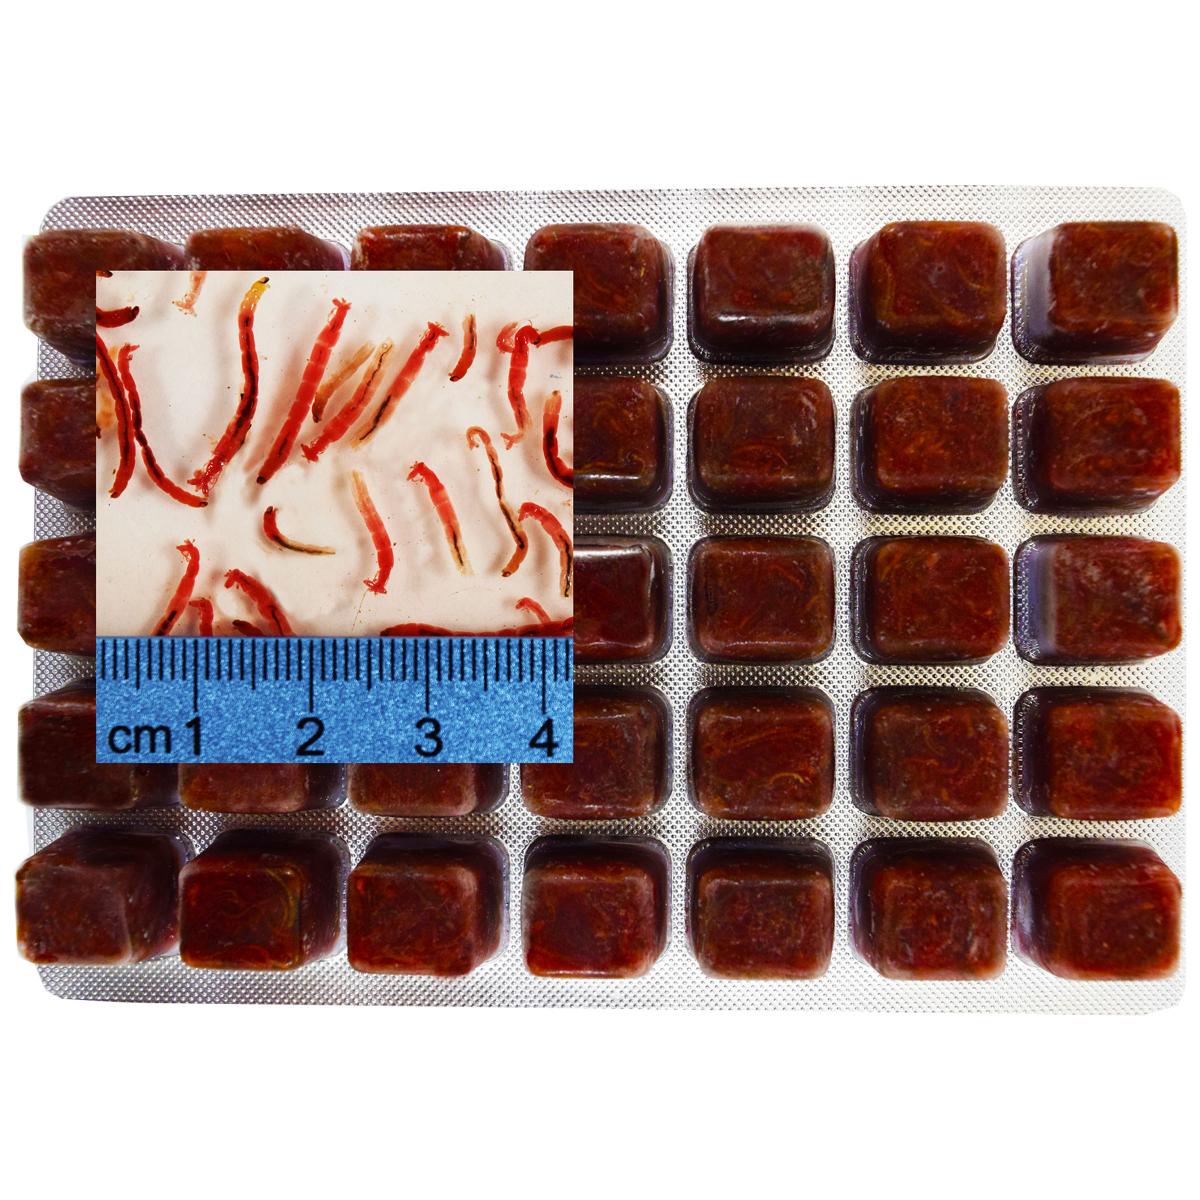 Frozen blood worms… ok for saltwater fish?